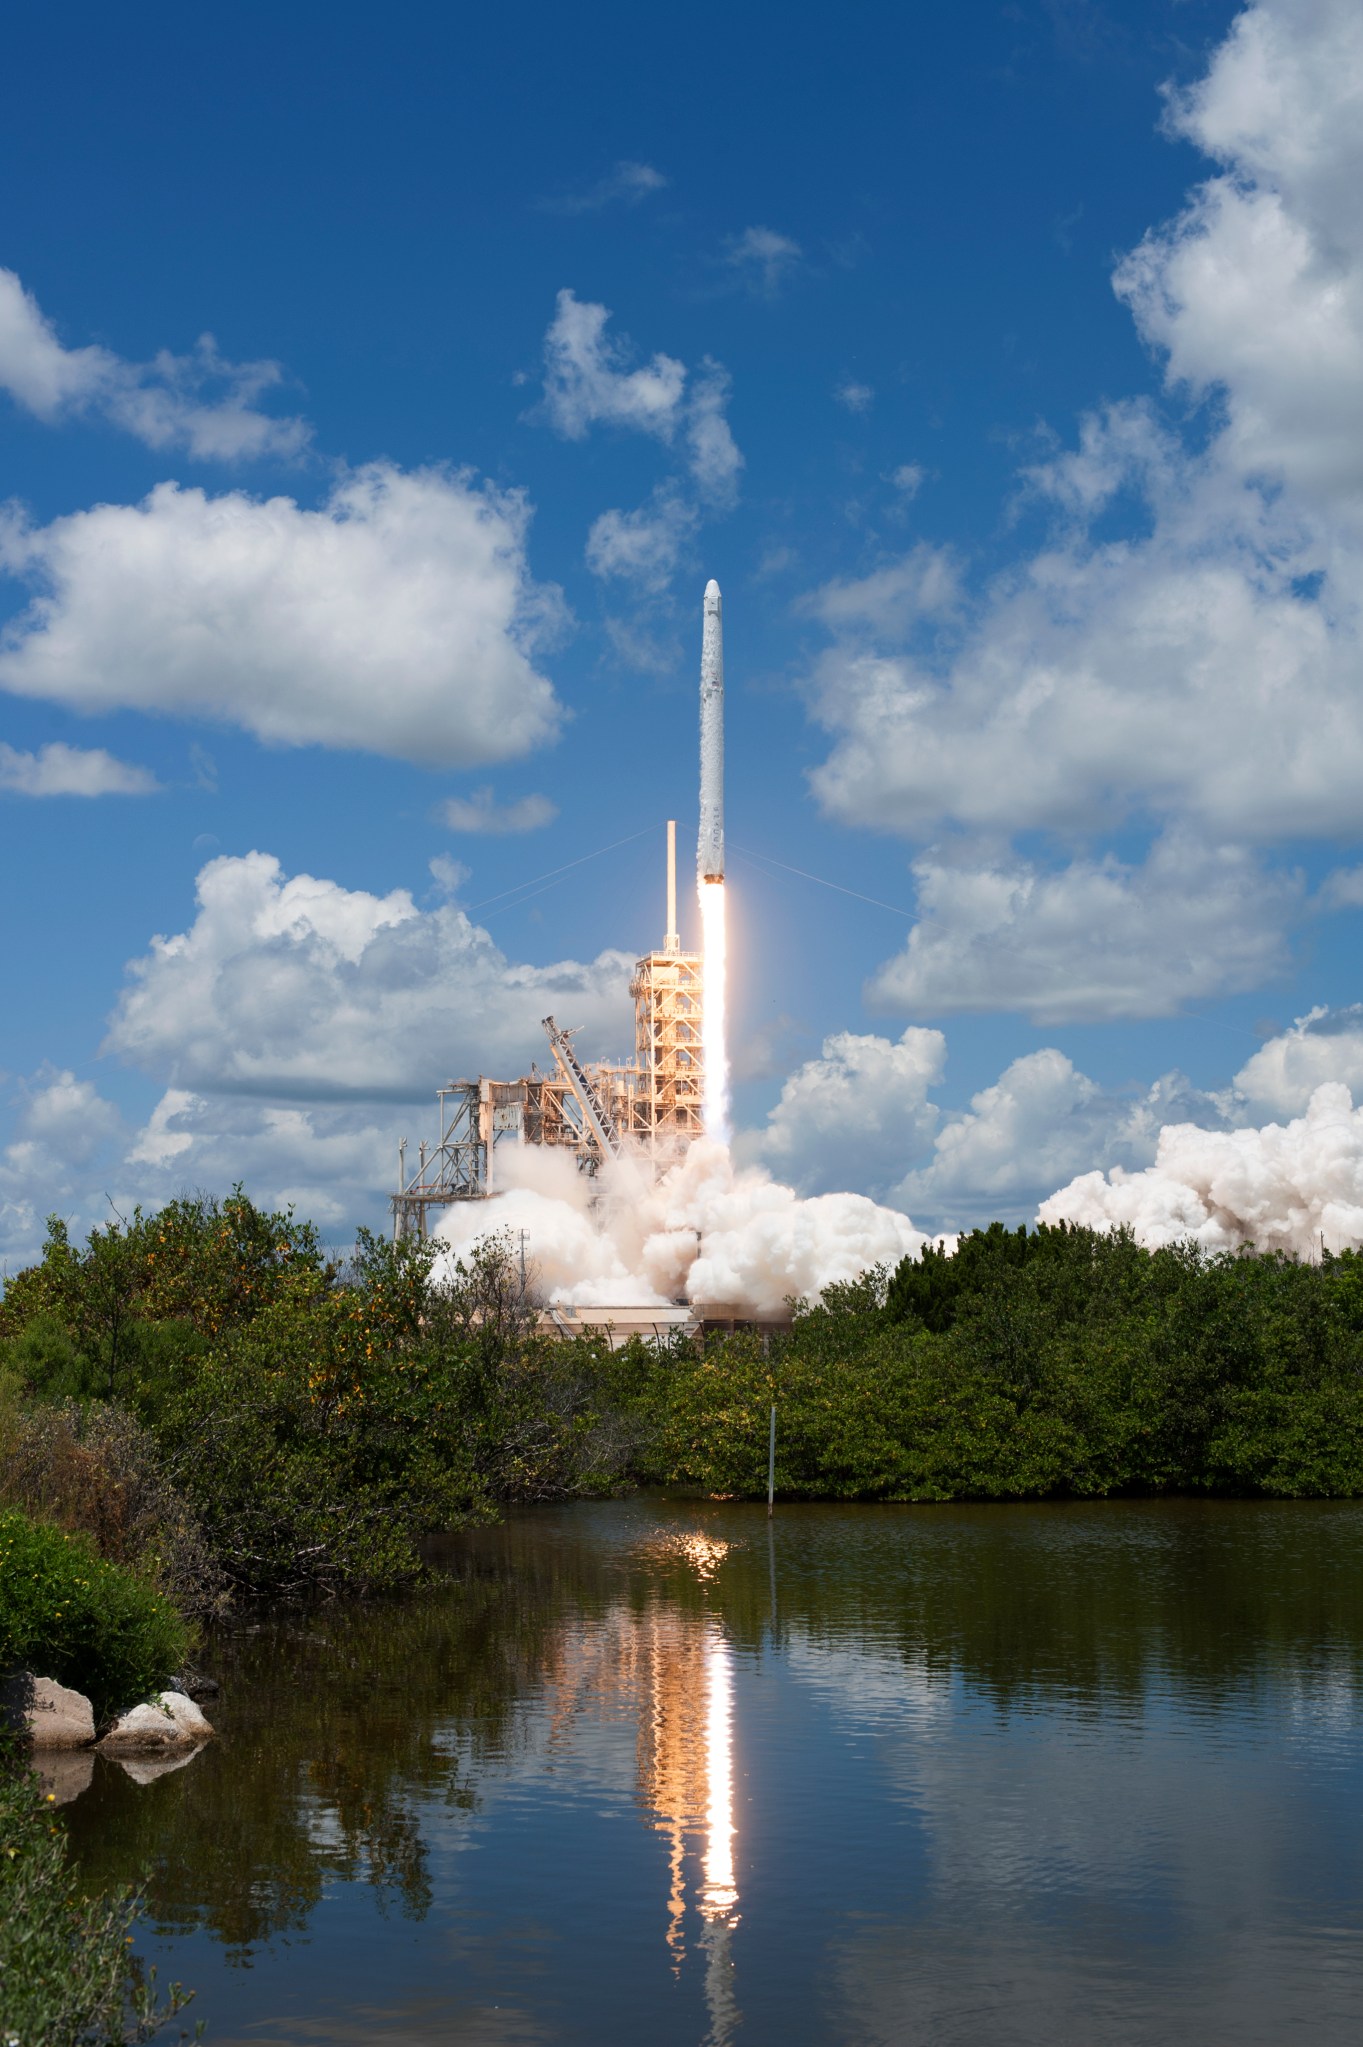  The Falcon 9 launch vehicle lifts off carrying the CRS-12 to the International Space Station. The sky is bright blue with puffy clouds. The rocket shoots up through the center of the frame, with green trees framing its bottom. A body of water in the foreground reflects the rocket, its fire, and the tower.